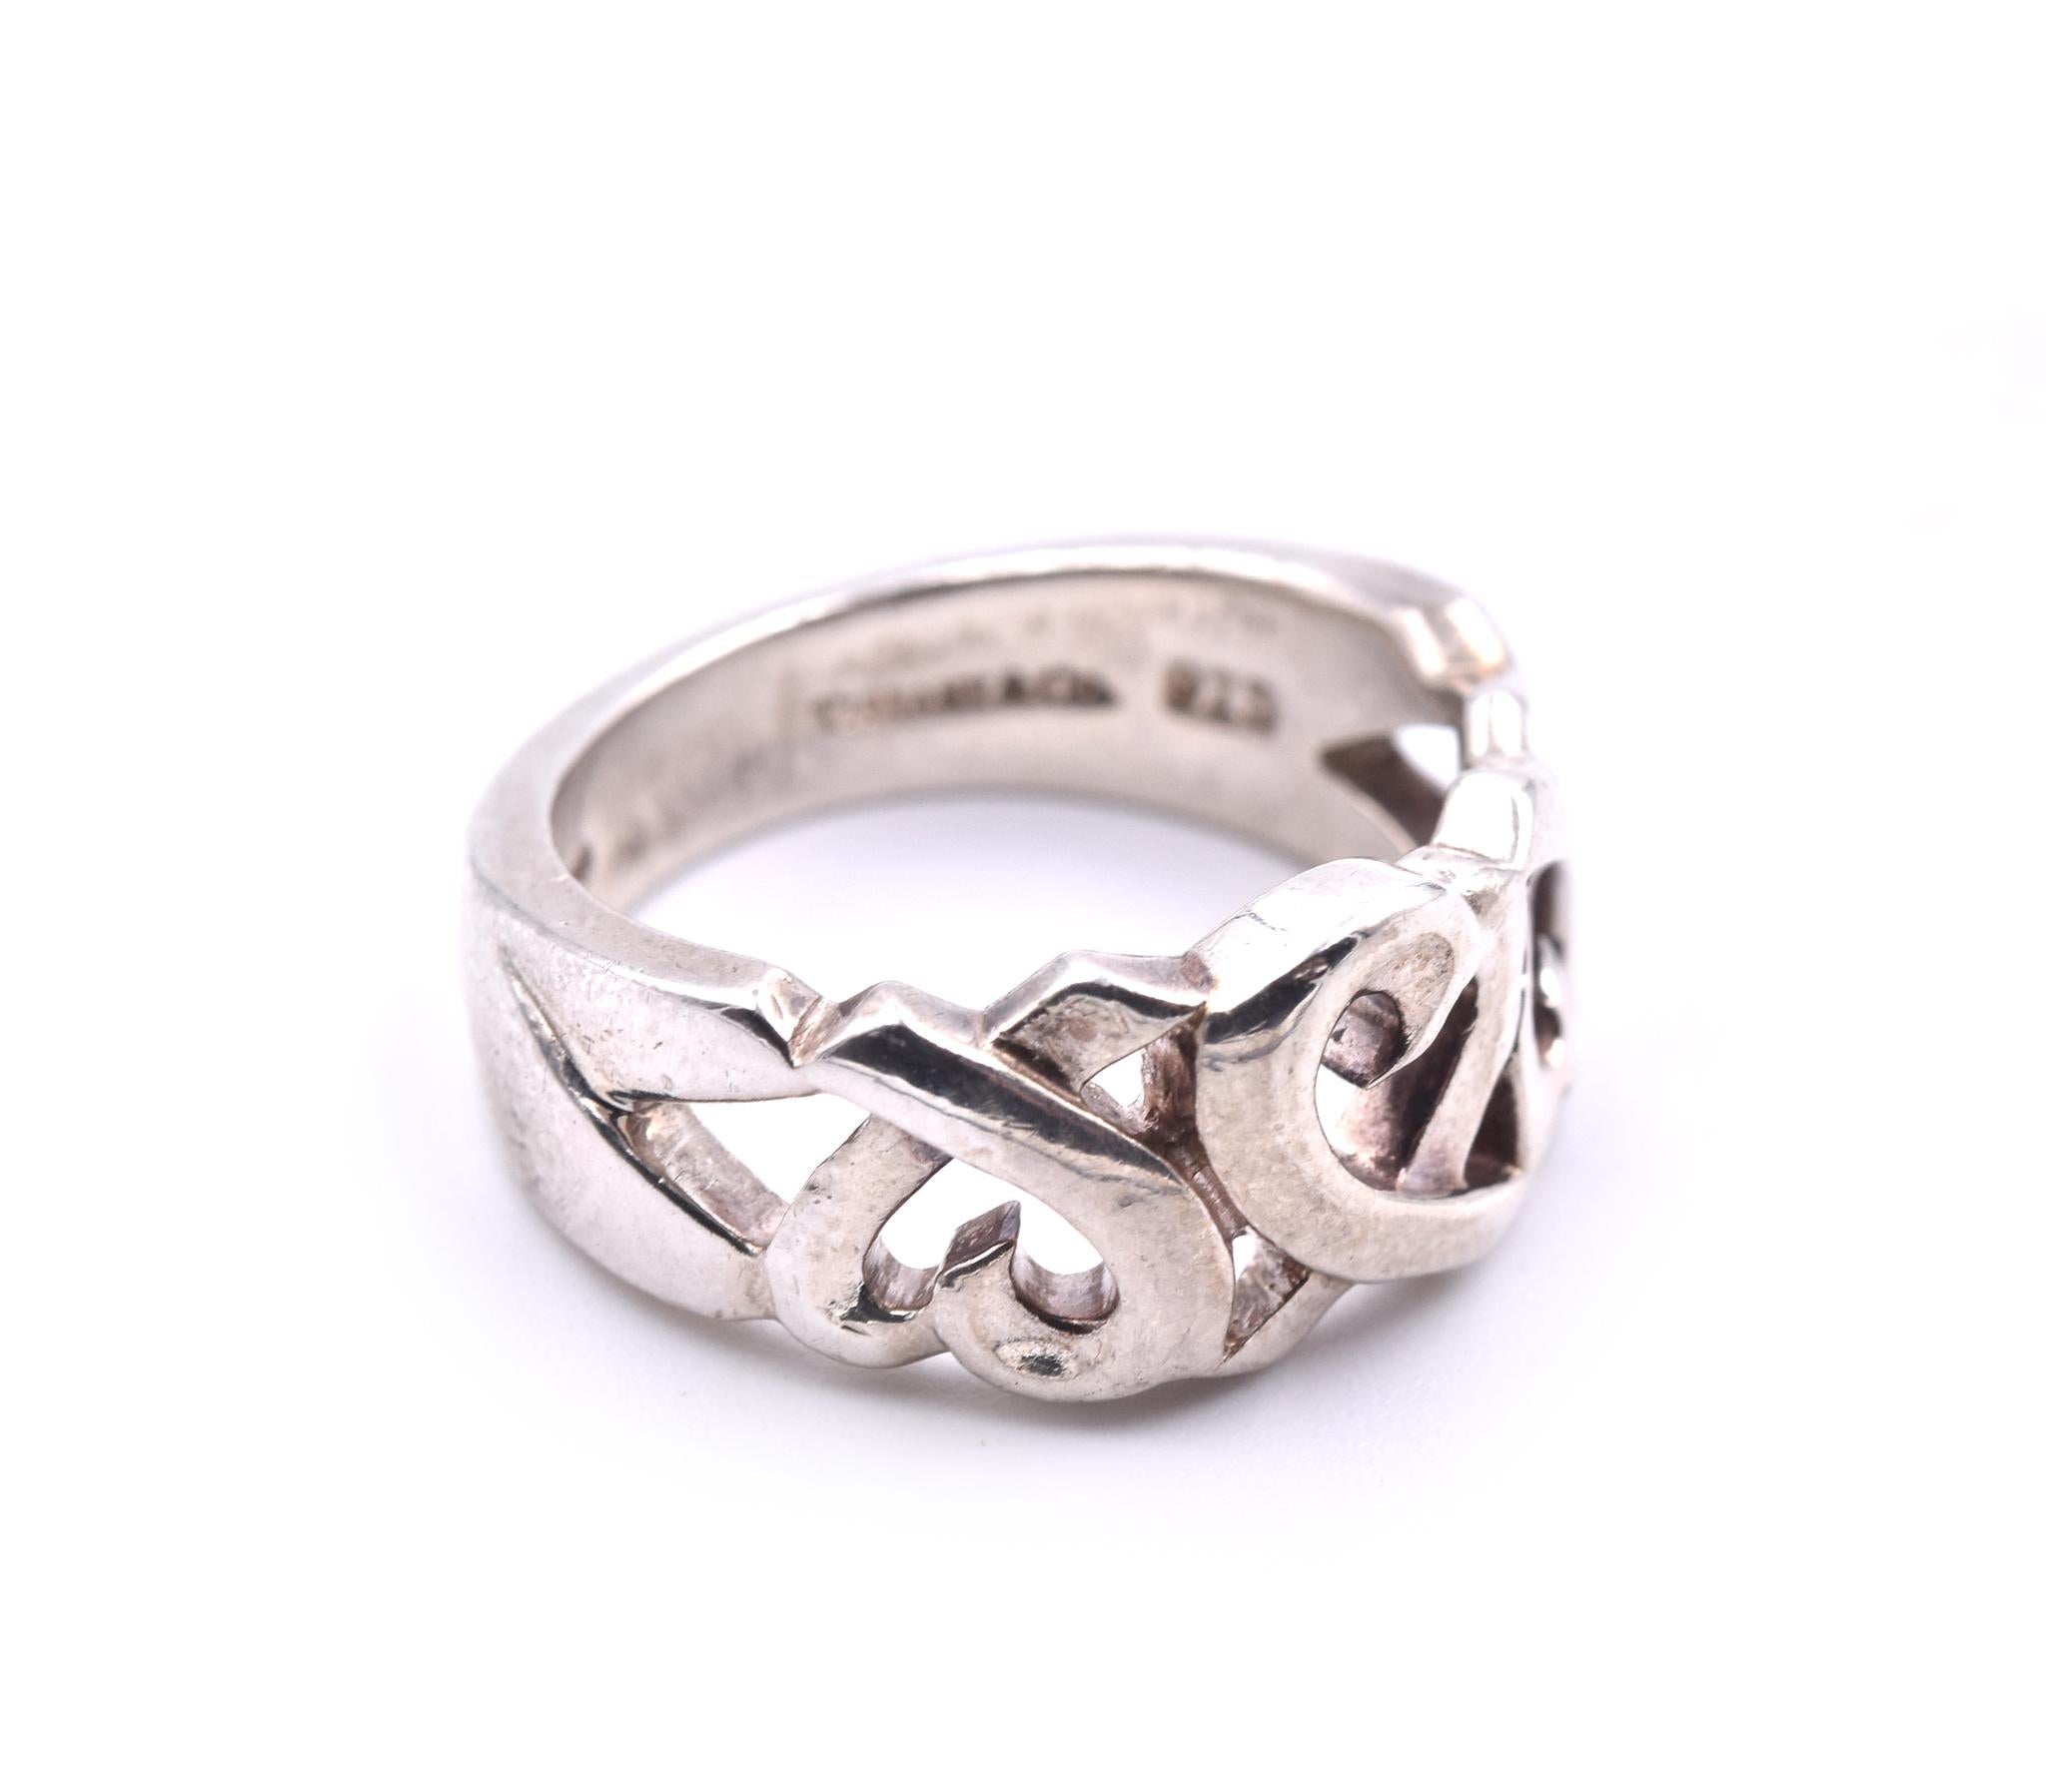 Designer: Tiffany & Co.
Material: sterling silver
Ring Size: 6
Dimensions: ring is approximately 9.30mm wide 
Weight: 5.99 grams
